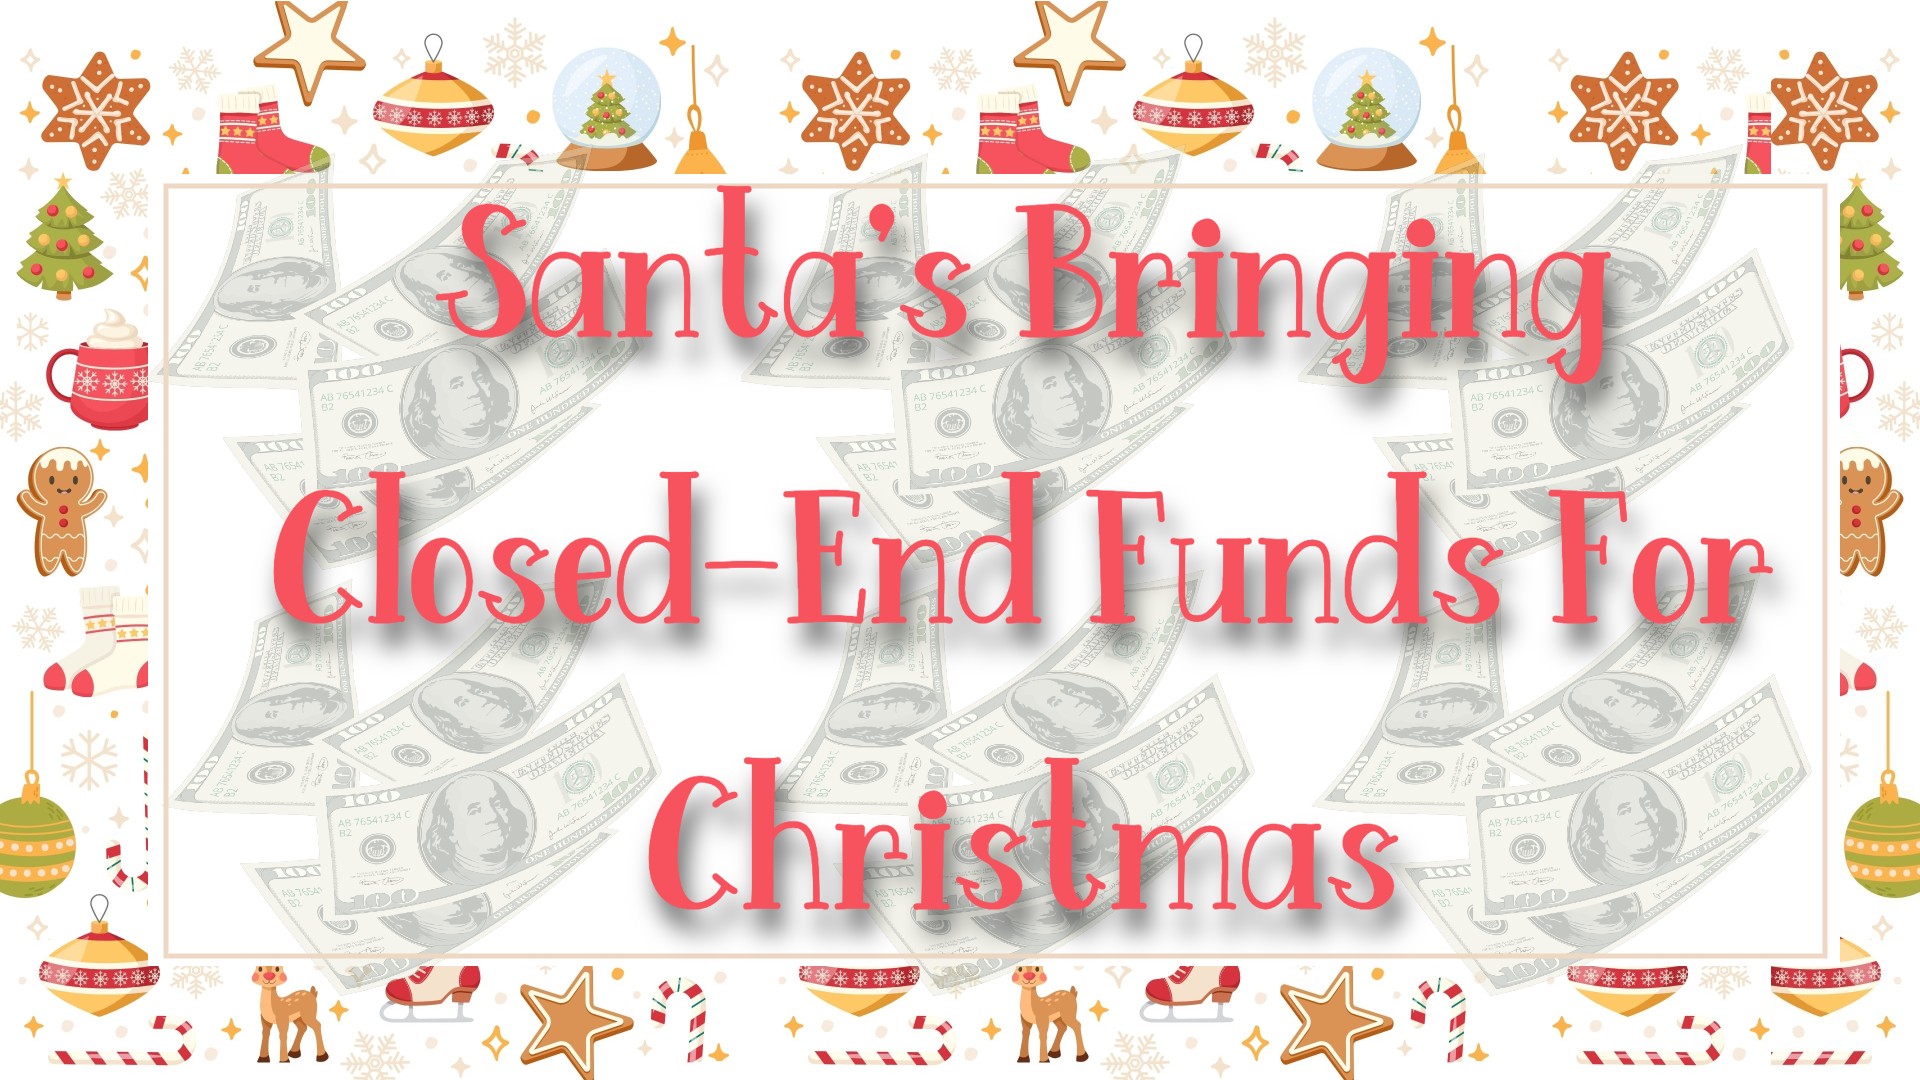 Santa’s Bringing Closed-End Funds for Christmas